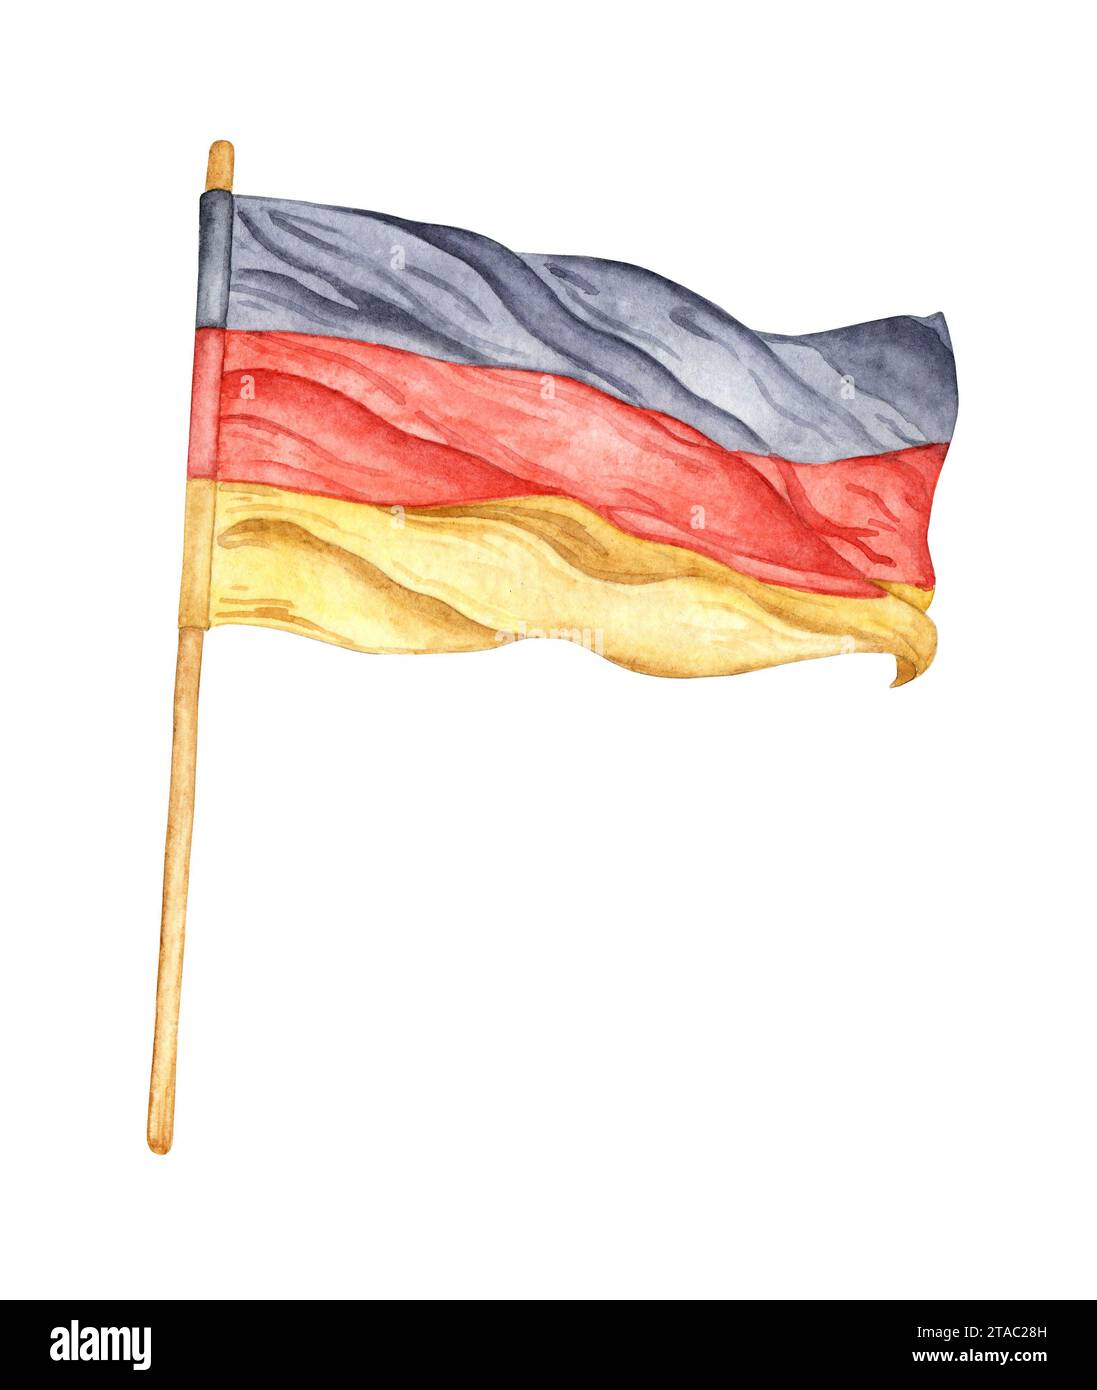 Watercolor illustration of the flag of Germany developing in the wind, black, red, yellow colors. National German symbol. Isolated on a white backgrou Stock Photo